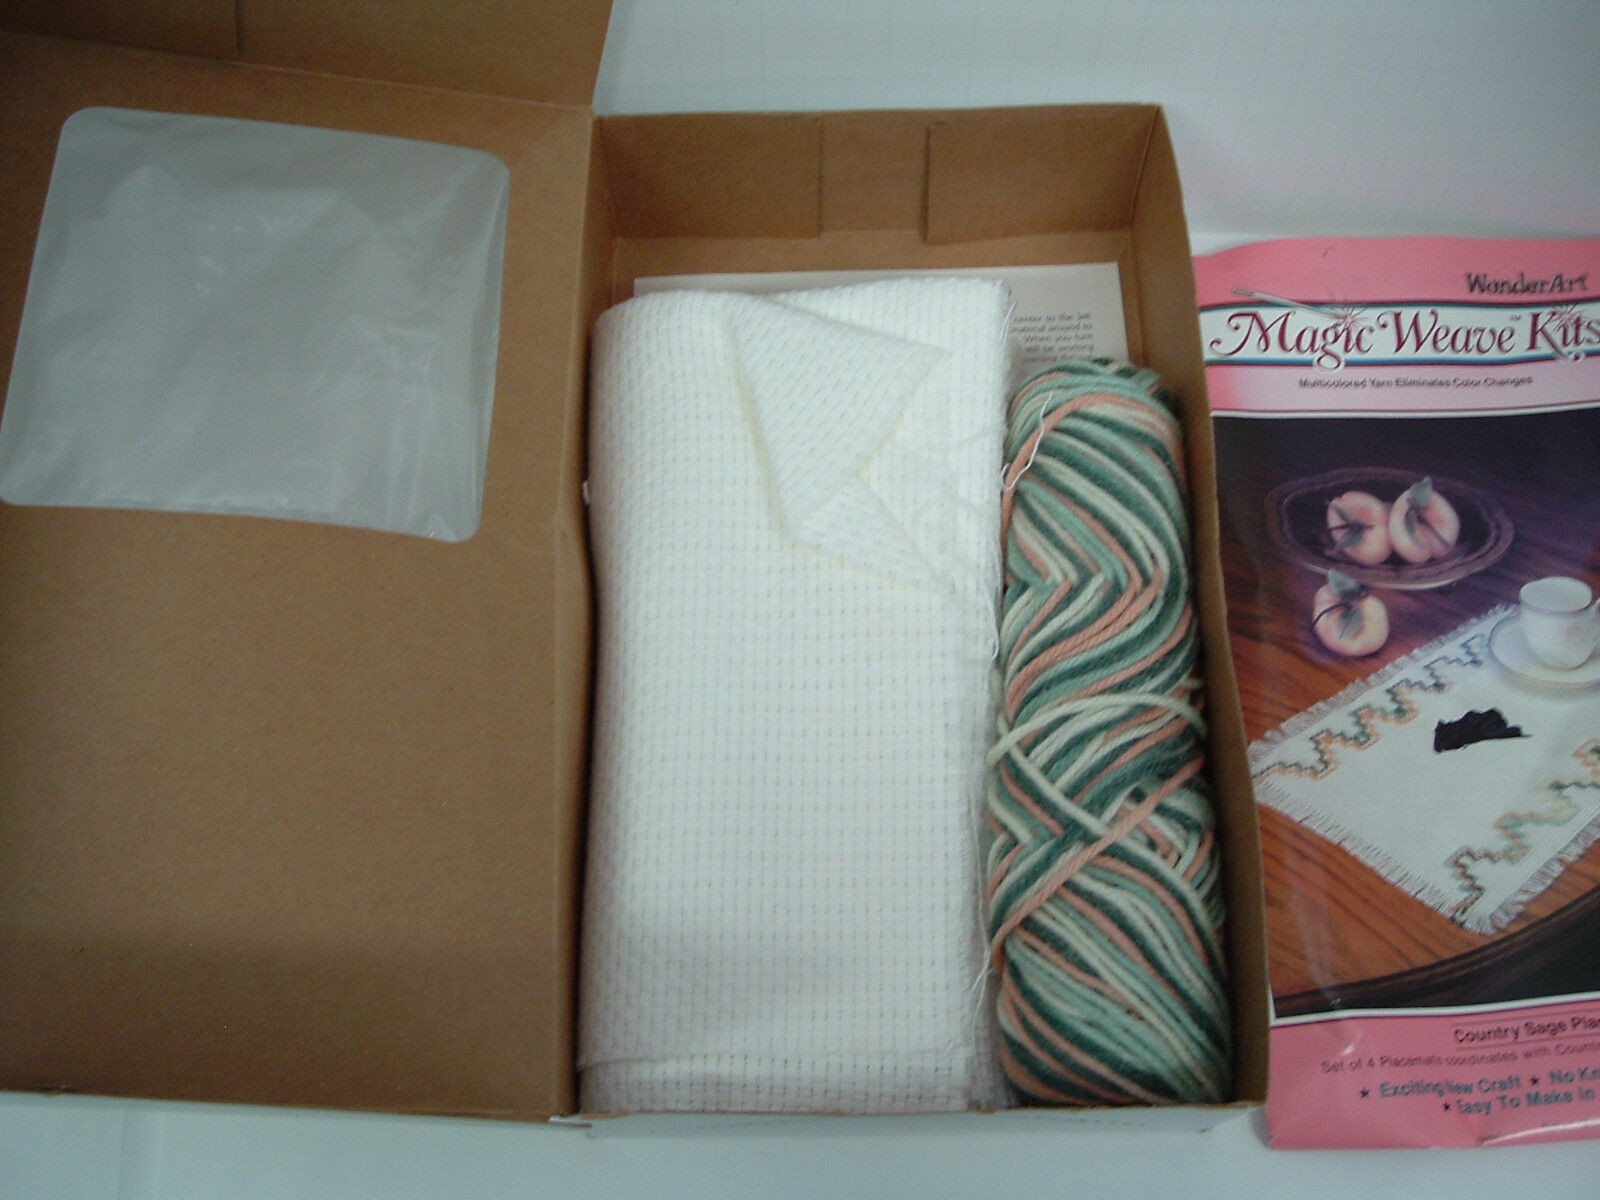 Vintage crafts wonder arts magic weave kit country sage placemats  never used - $19.75